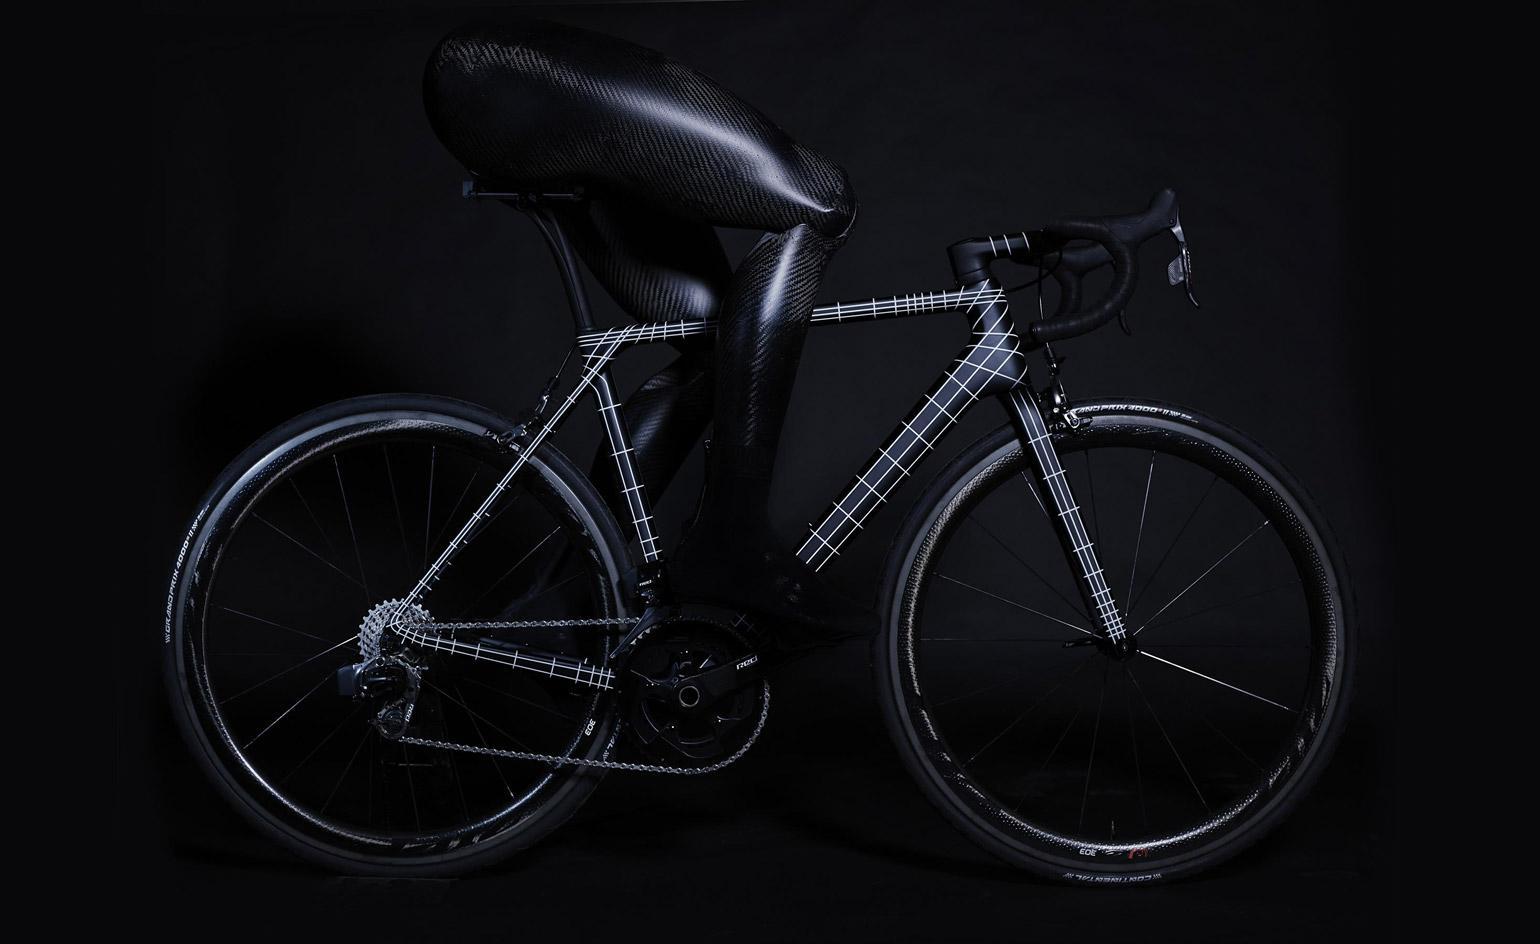 Canyon's Kraftwerk Designed Bicycle Is A Futuristic Marvel